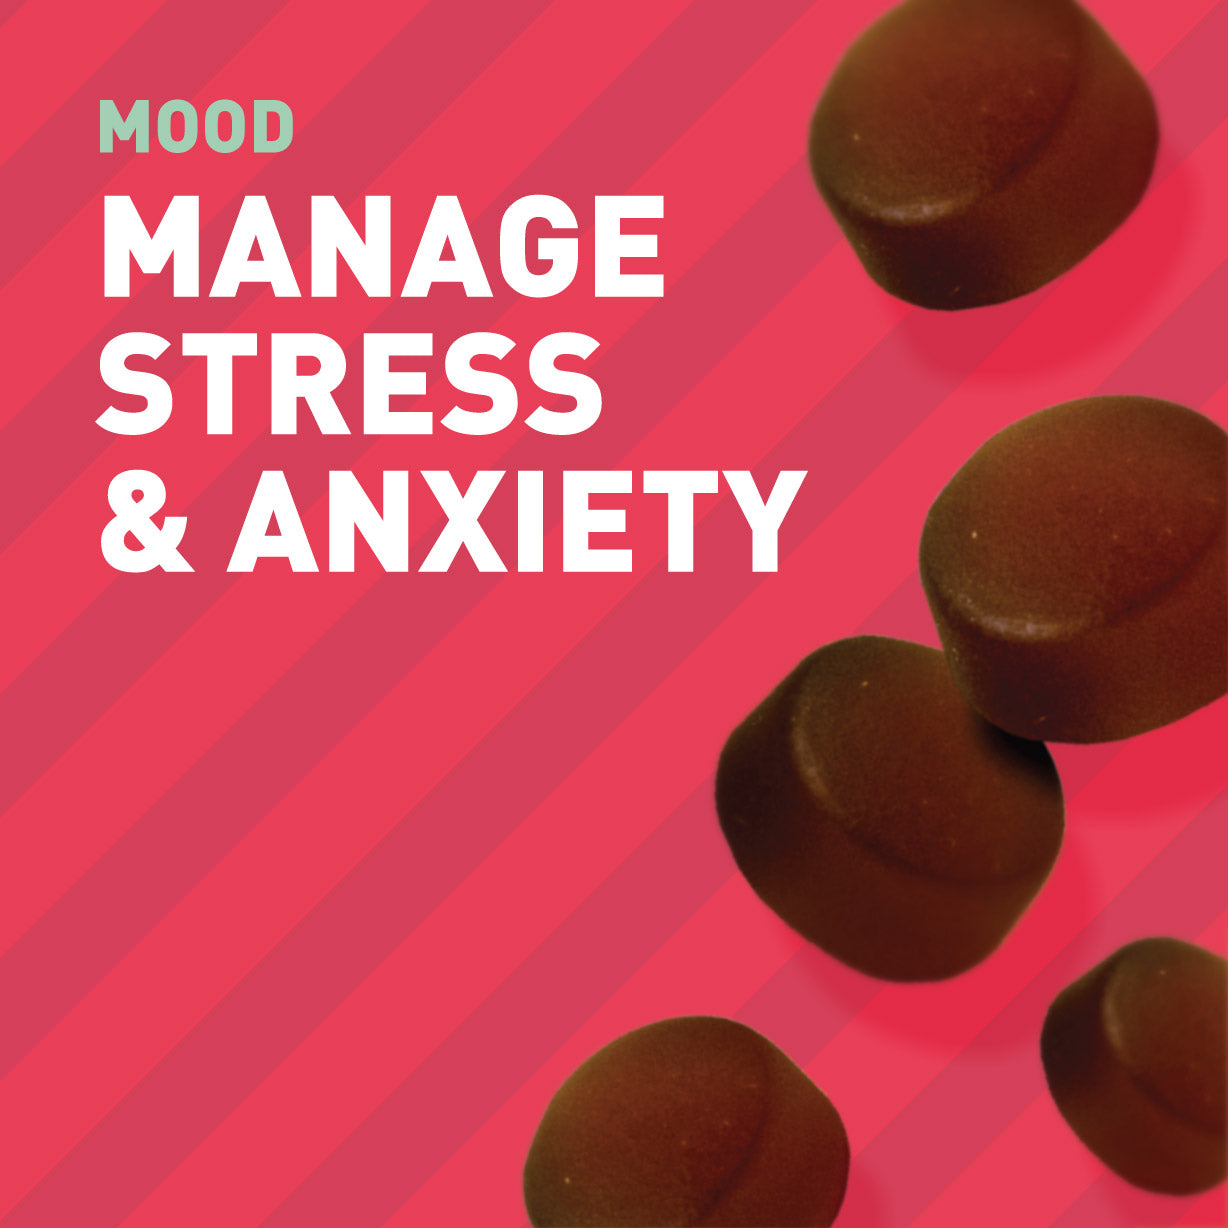 Gummies for stress and anxiety containing Ashwagandha, rhodiola, l theanine and b vitamins